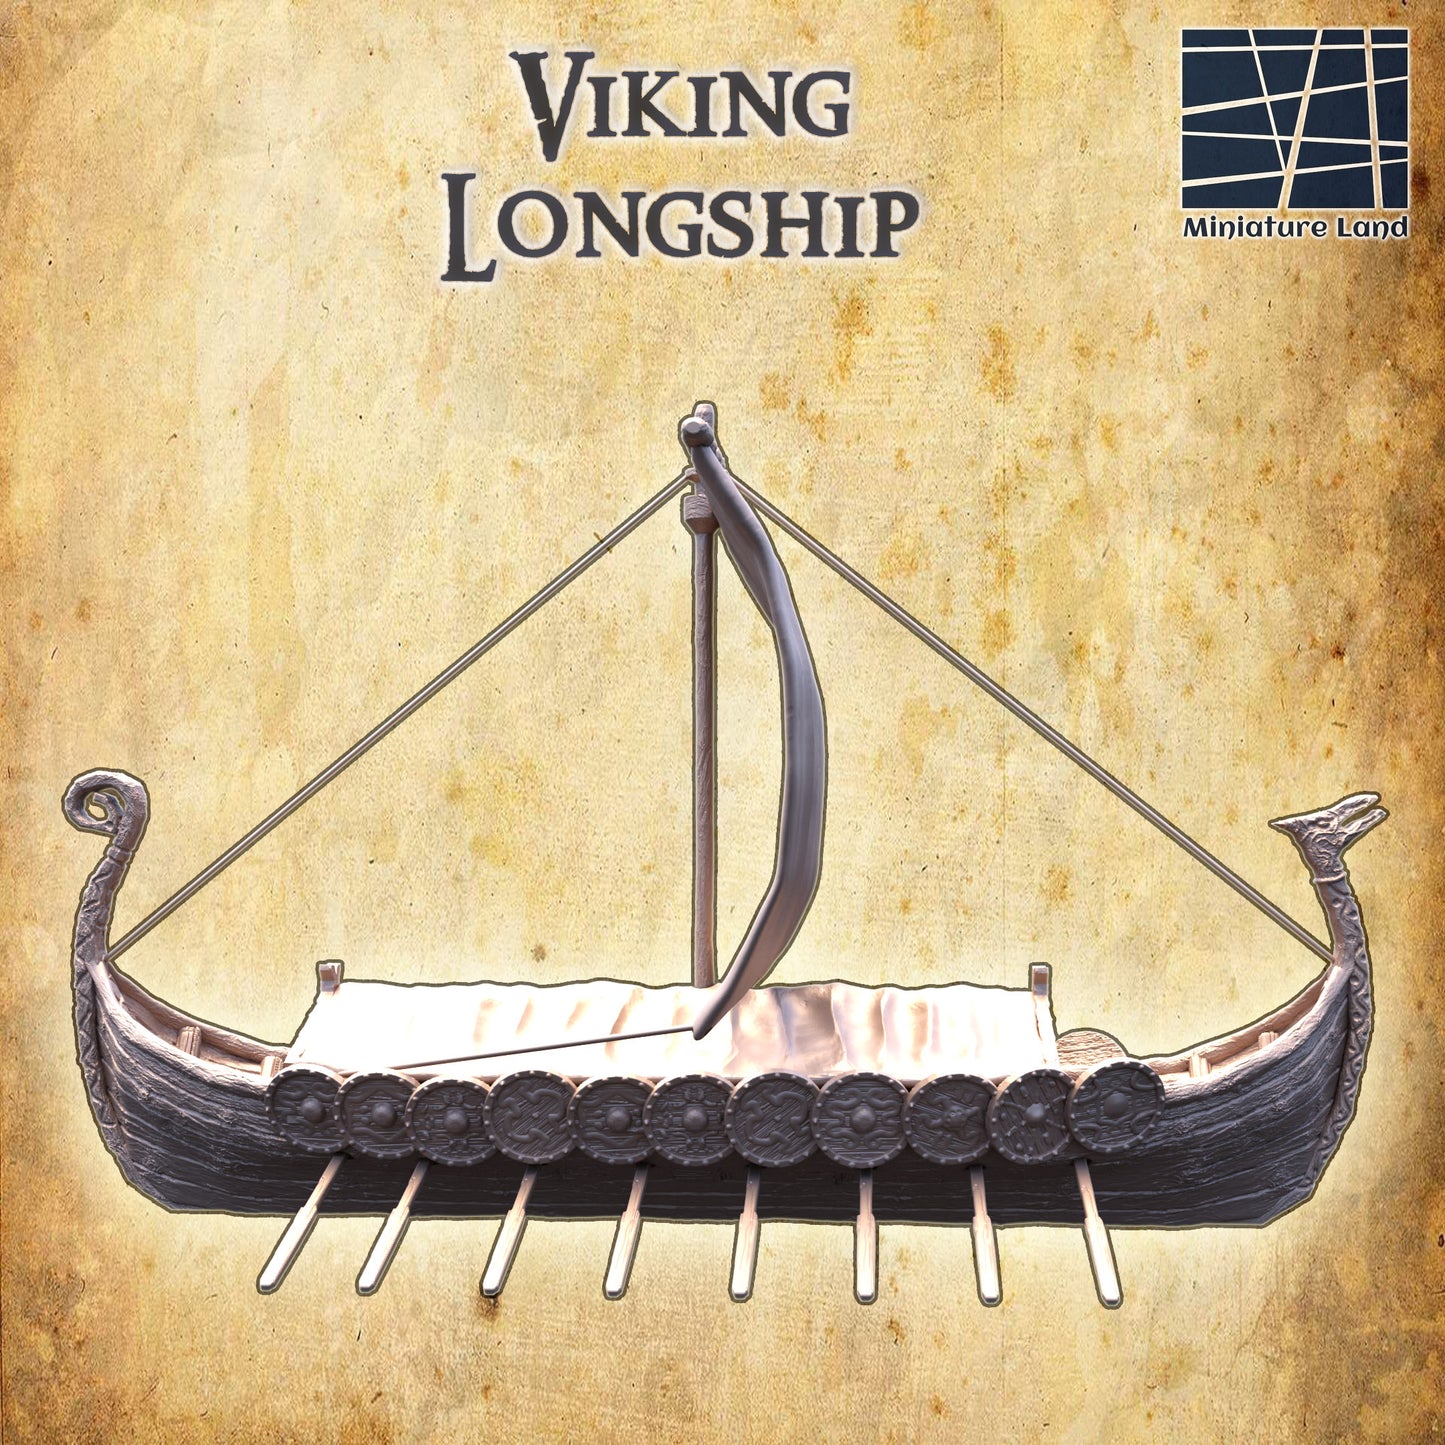 Covered Viking Long Ship, with shields